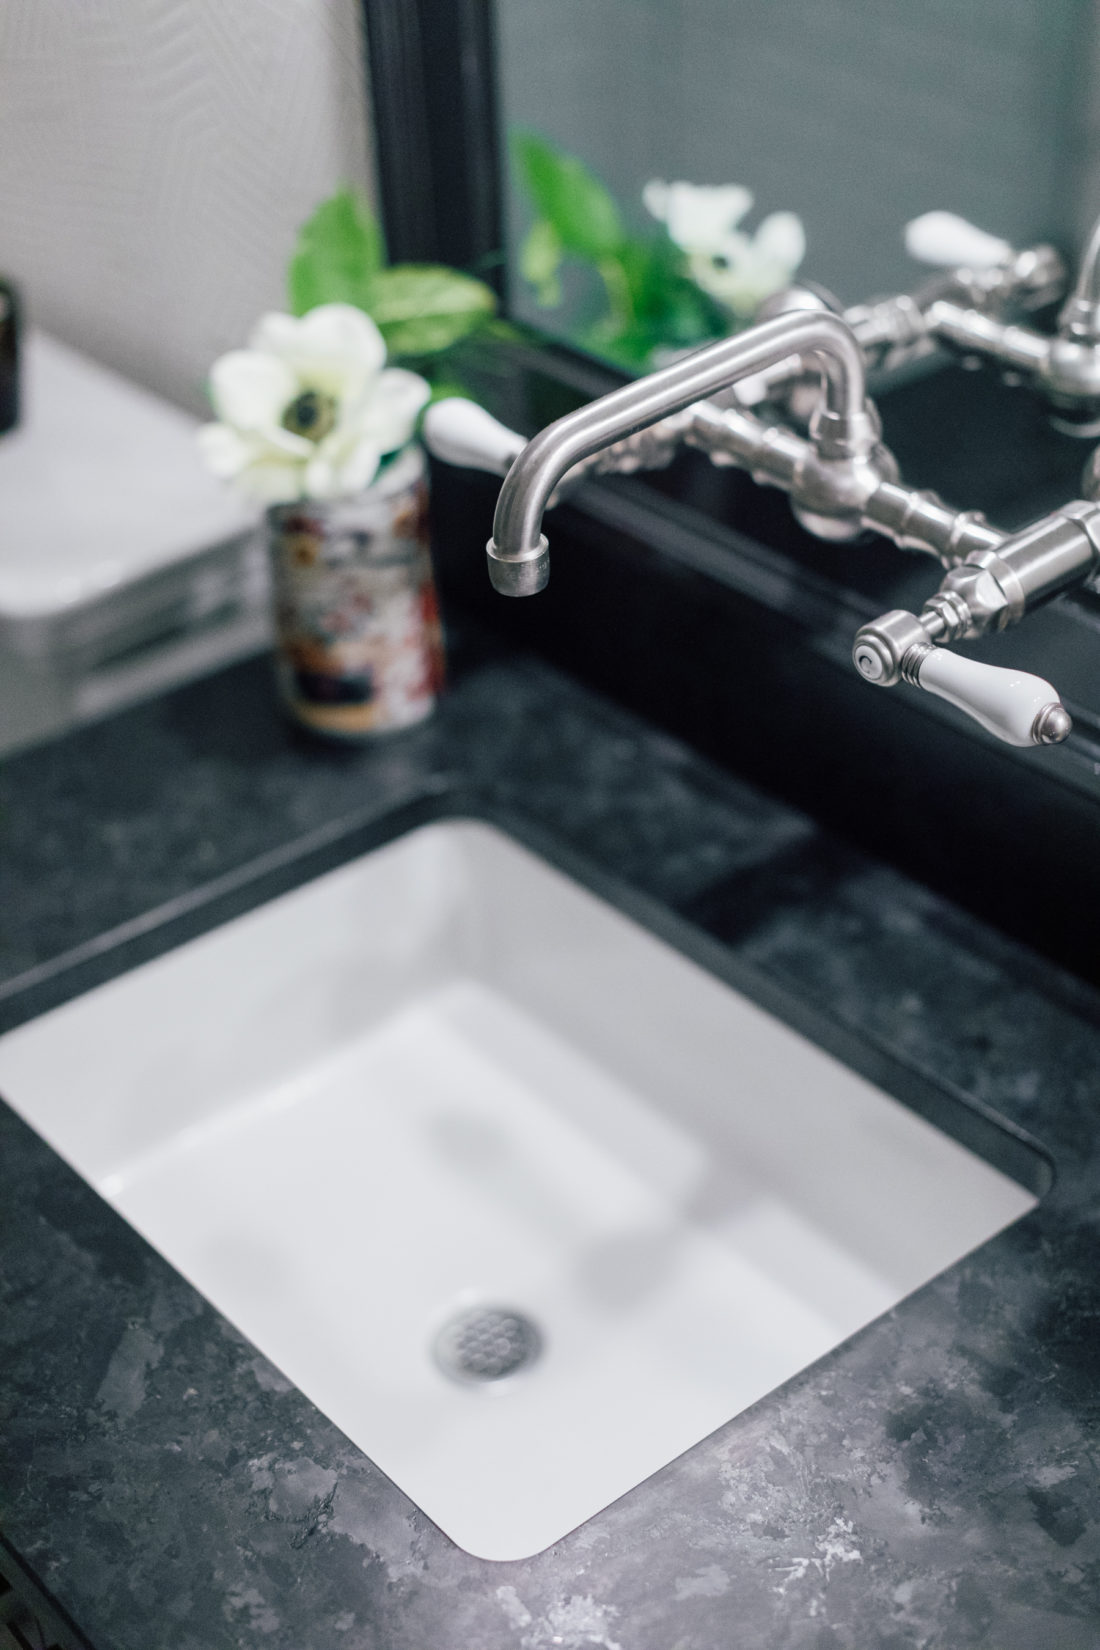 The Saint Henry Black granite countertop from Polycor inside Kyle Martino's masculine bathroom in his newly renovated Connecticut home